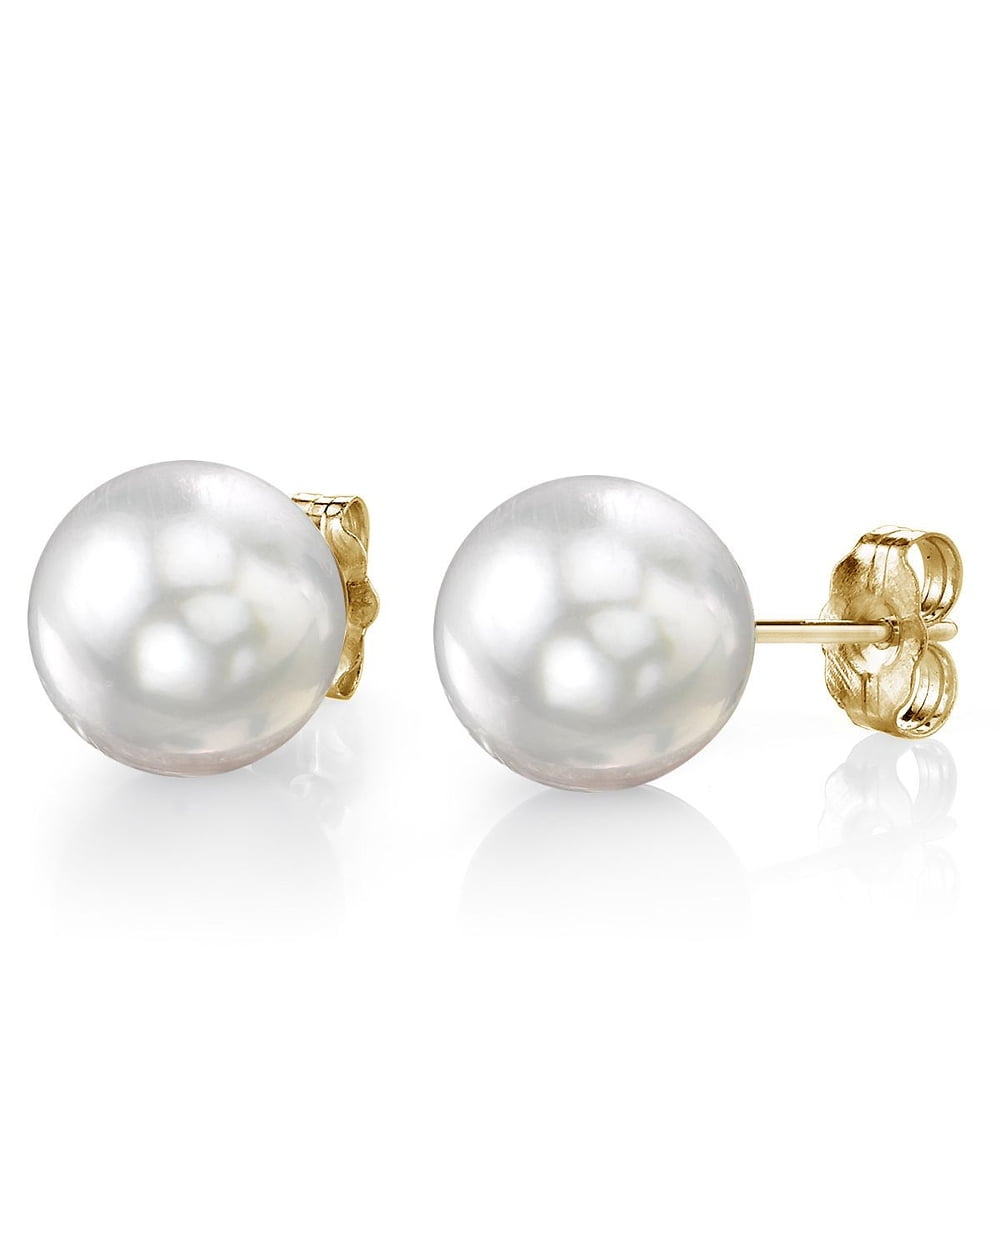 4 sets of white natural AAA 9-10mm South Seas pearl earrings with 14 k ...